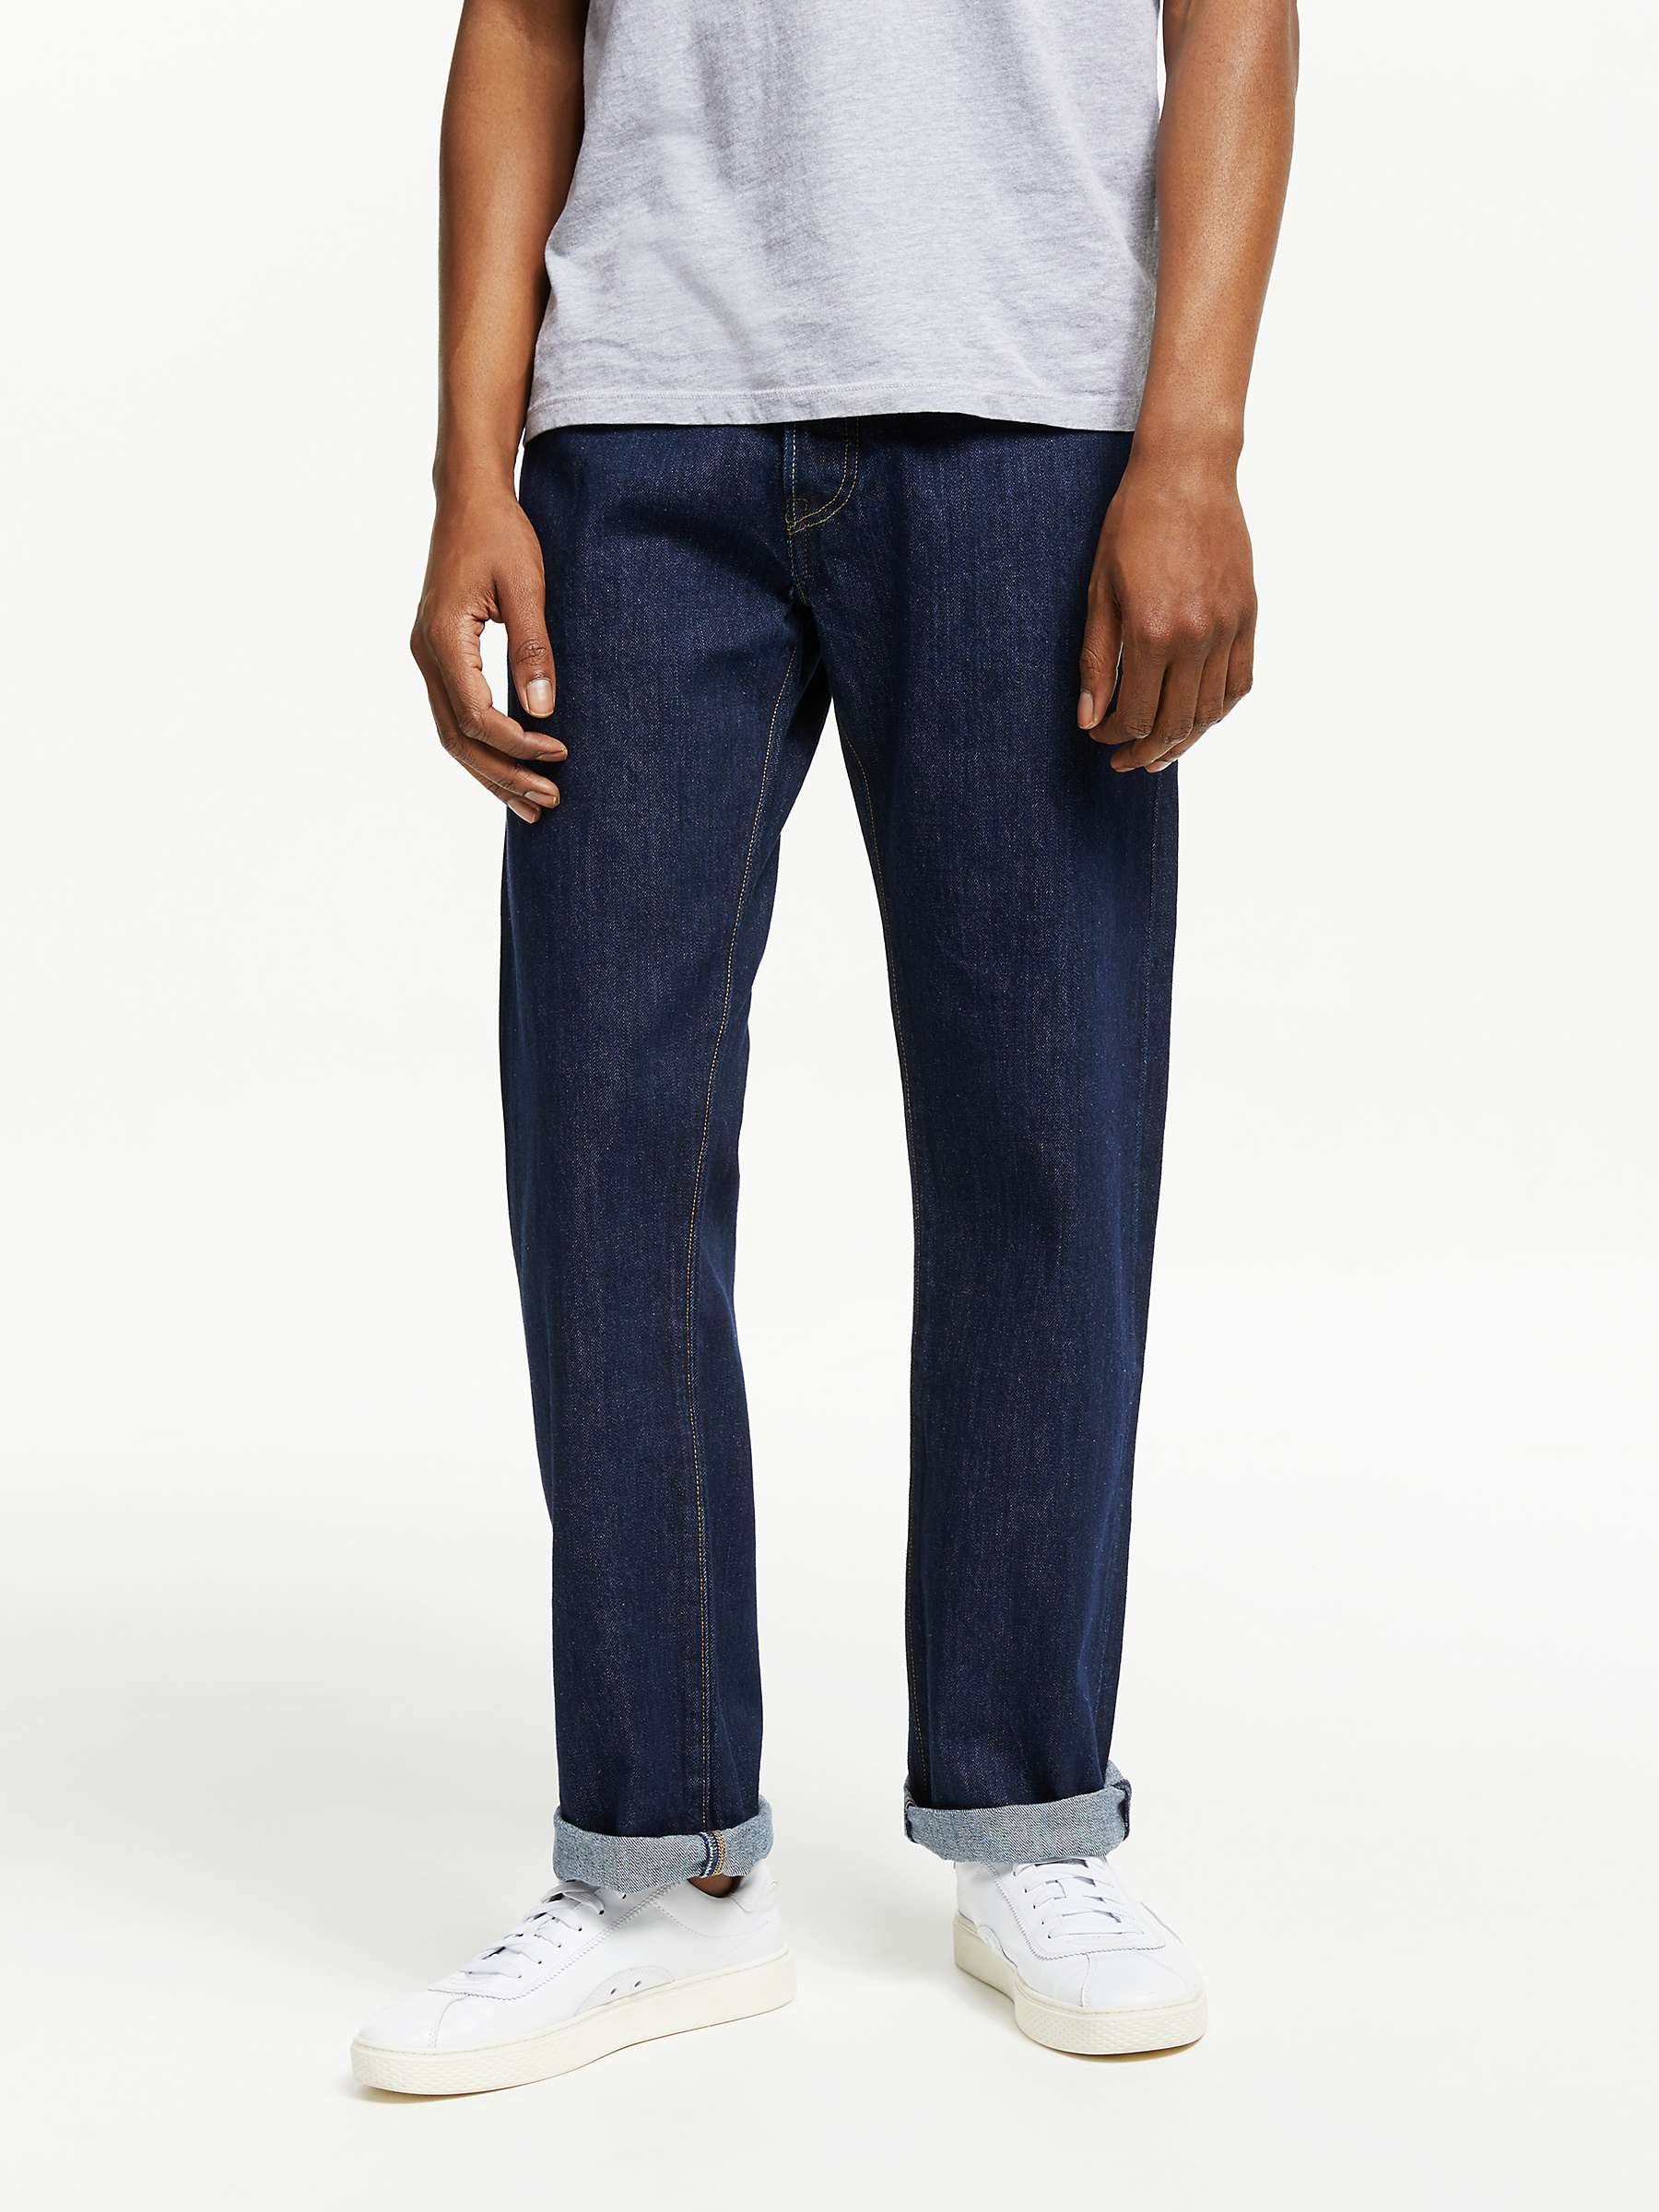 Buy Levi's 501 Original Straight Jeans, One Wash Online at johnlewis.com